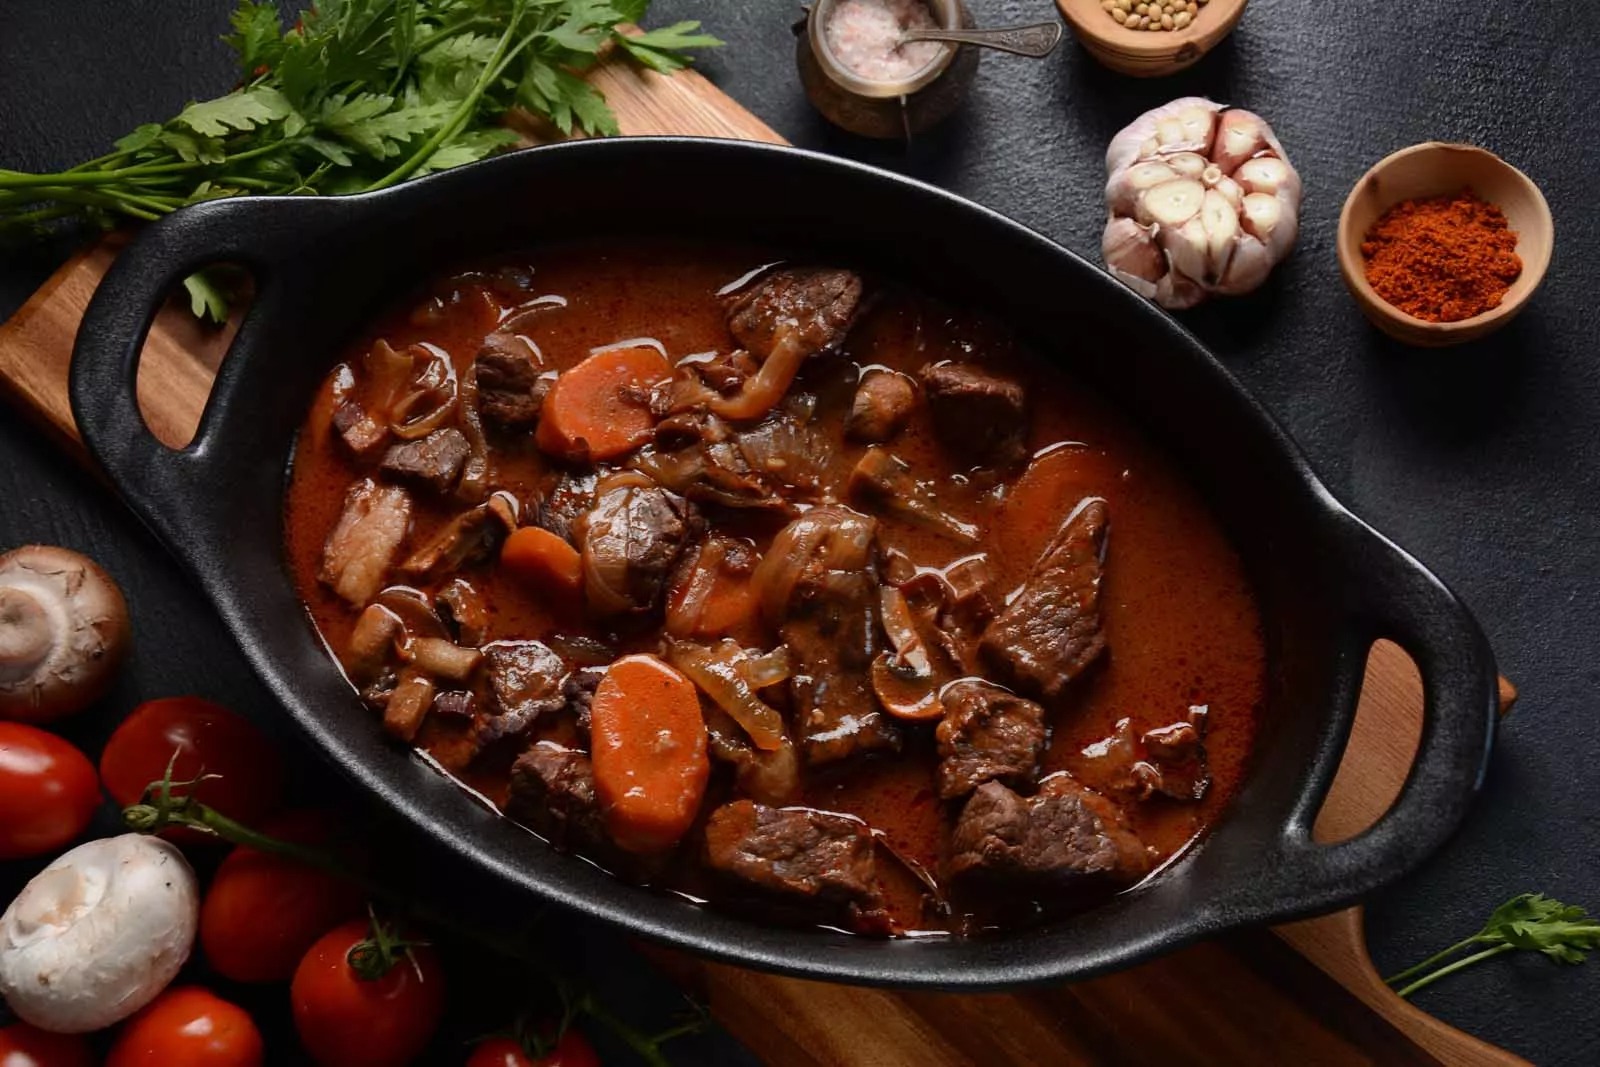 Trust Me, I Can Tell Which Generation You’re from Based on the Retro Food You Like Boeuf bourguignon